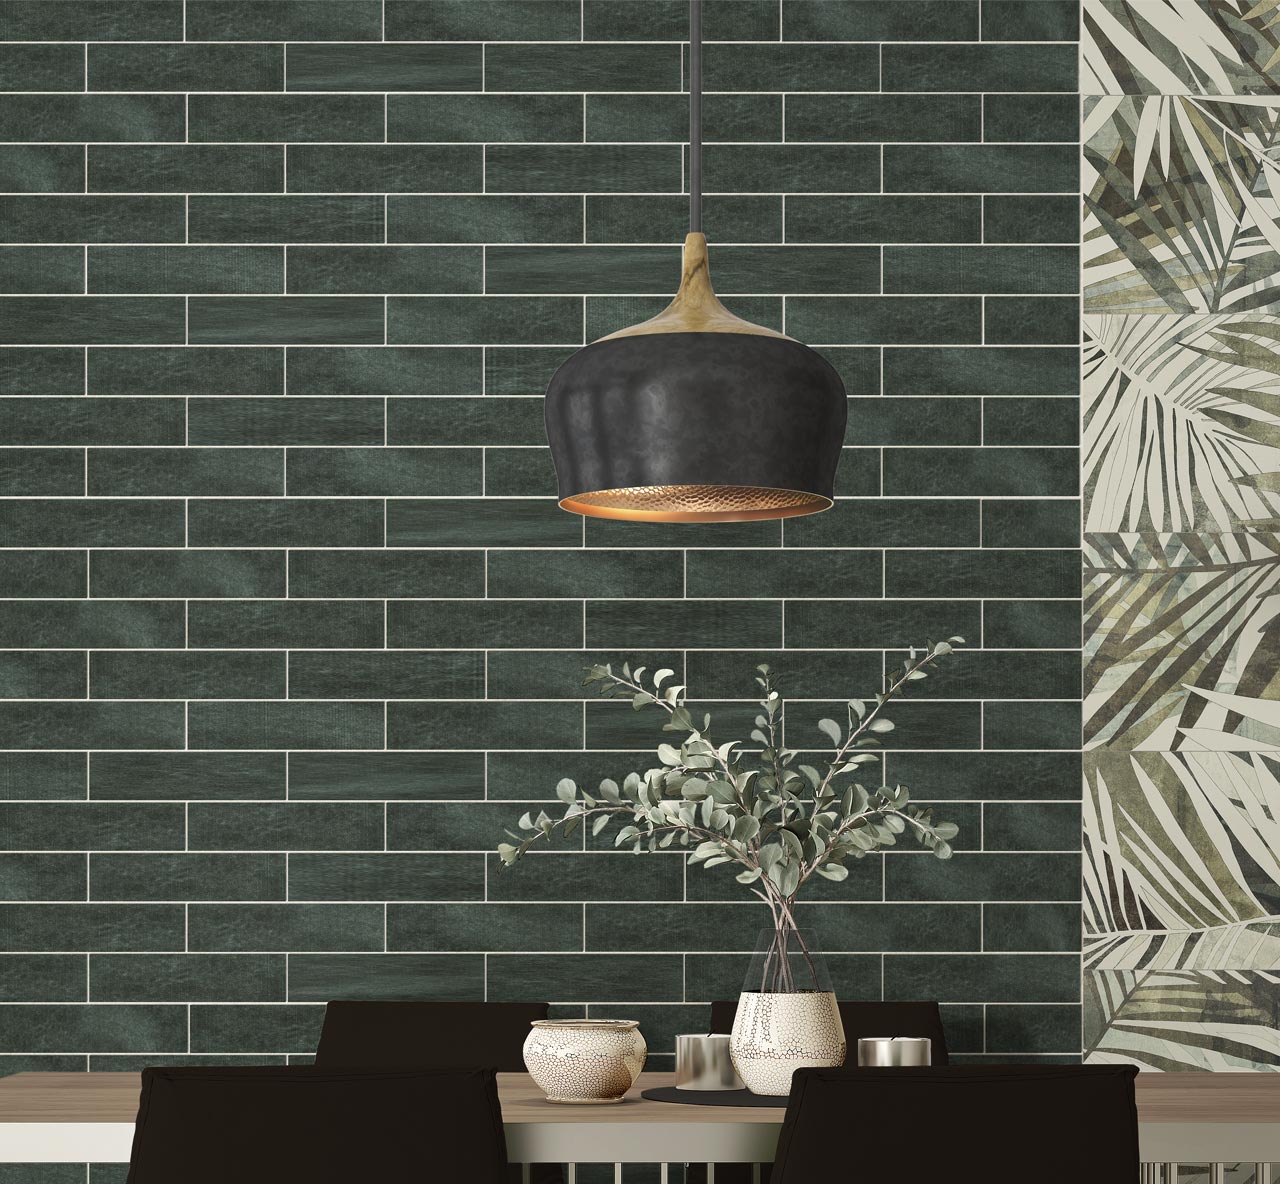 Marakkesh Green Gloss Metro Tiles used as stunning subway wall tiles like a floral feature wall in a dining room